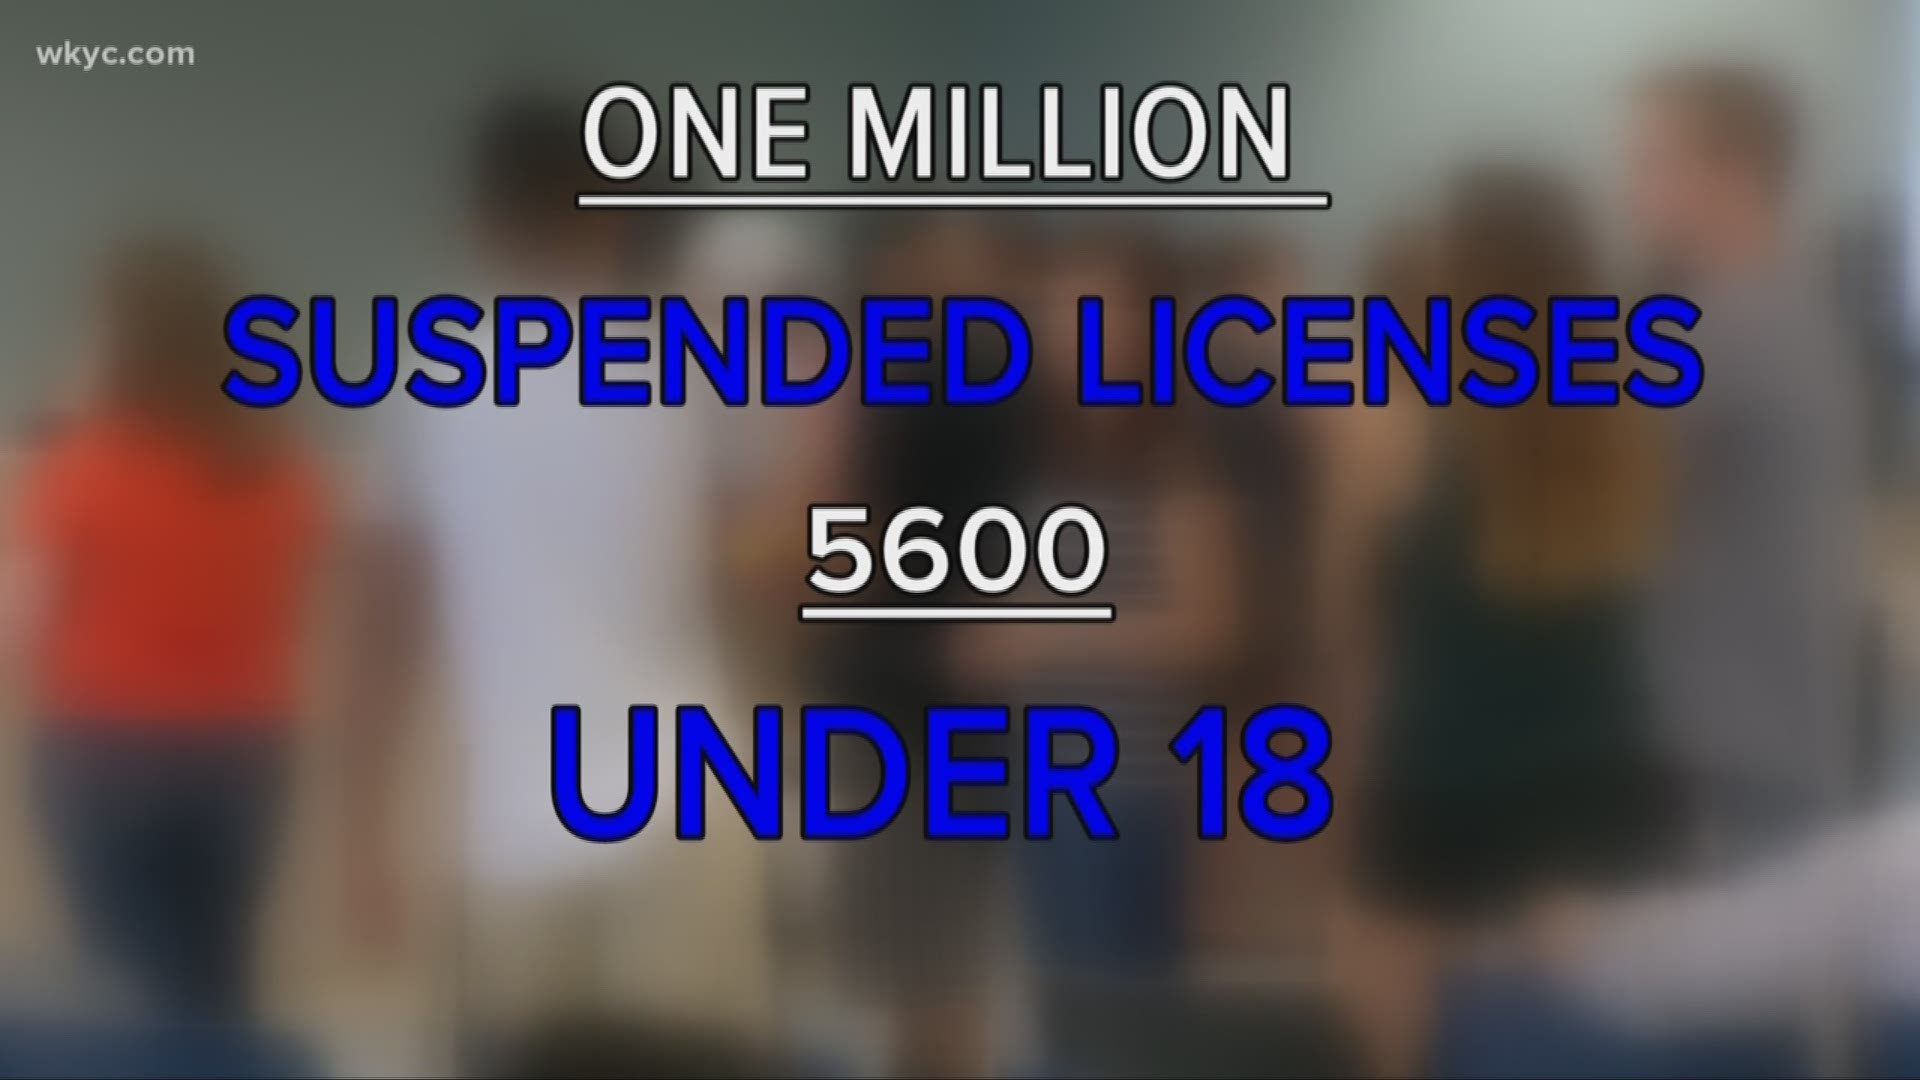 Teenagers highly impacted by license suspension in Ohio